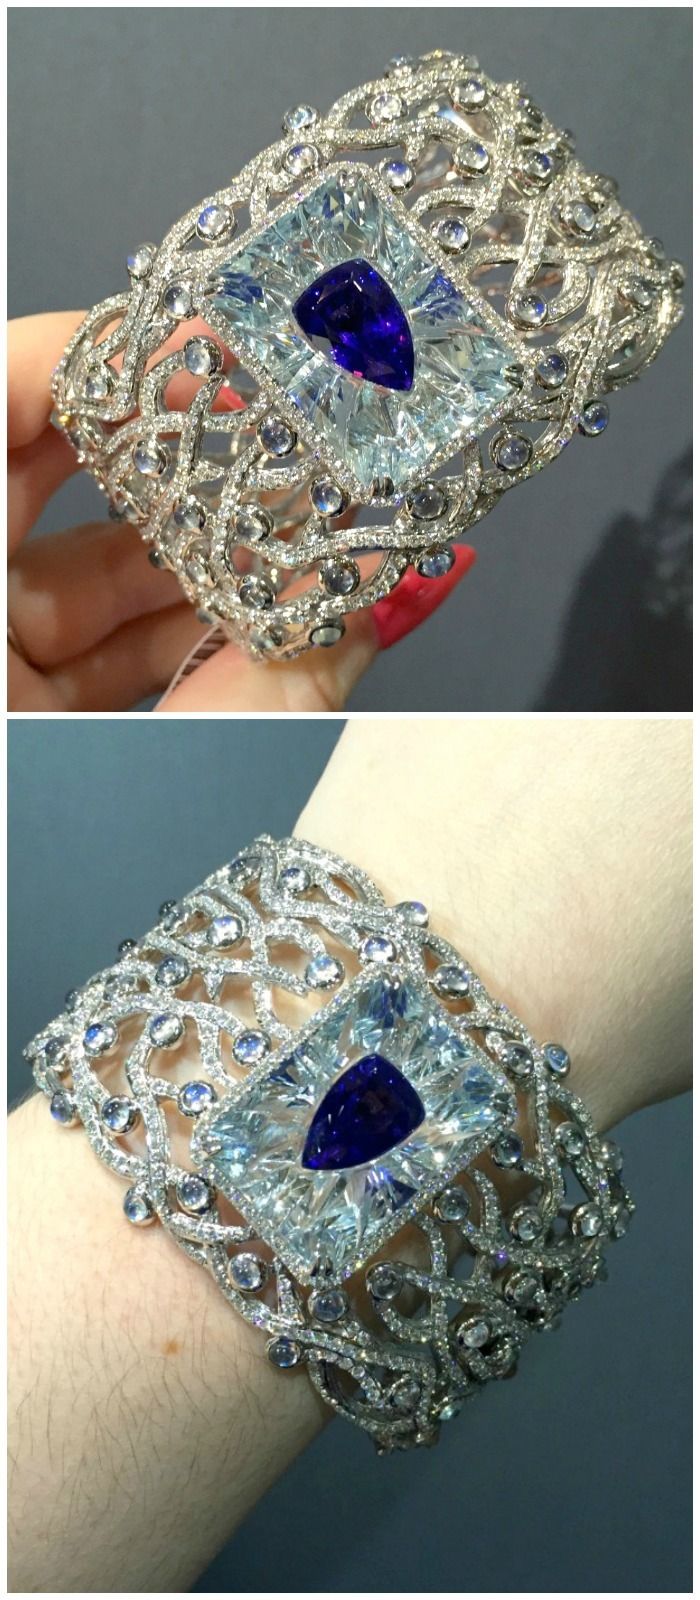 This Yael Designs bangle features a 7 carat tanzanite invisibly set inside a 26 ...